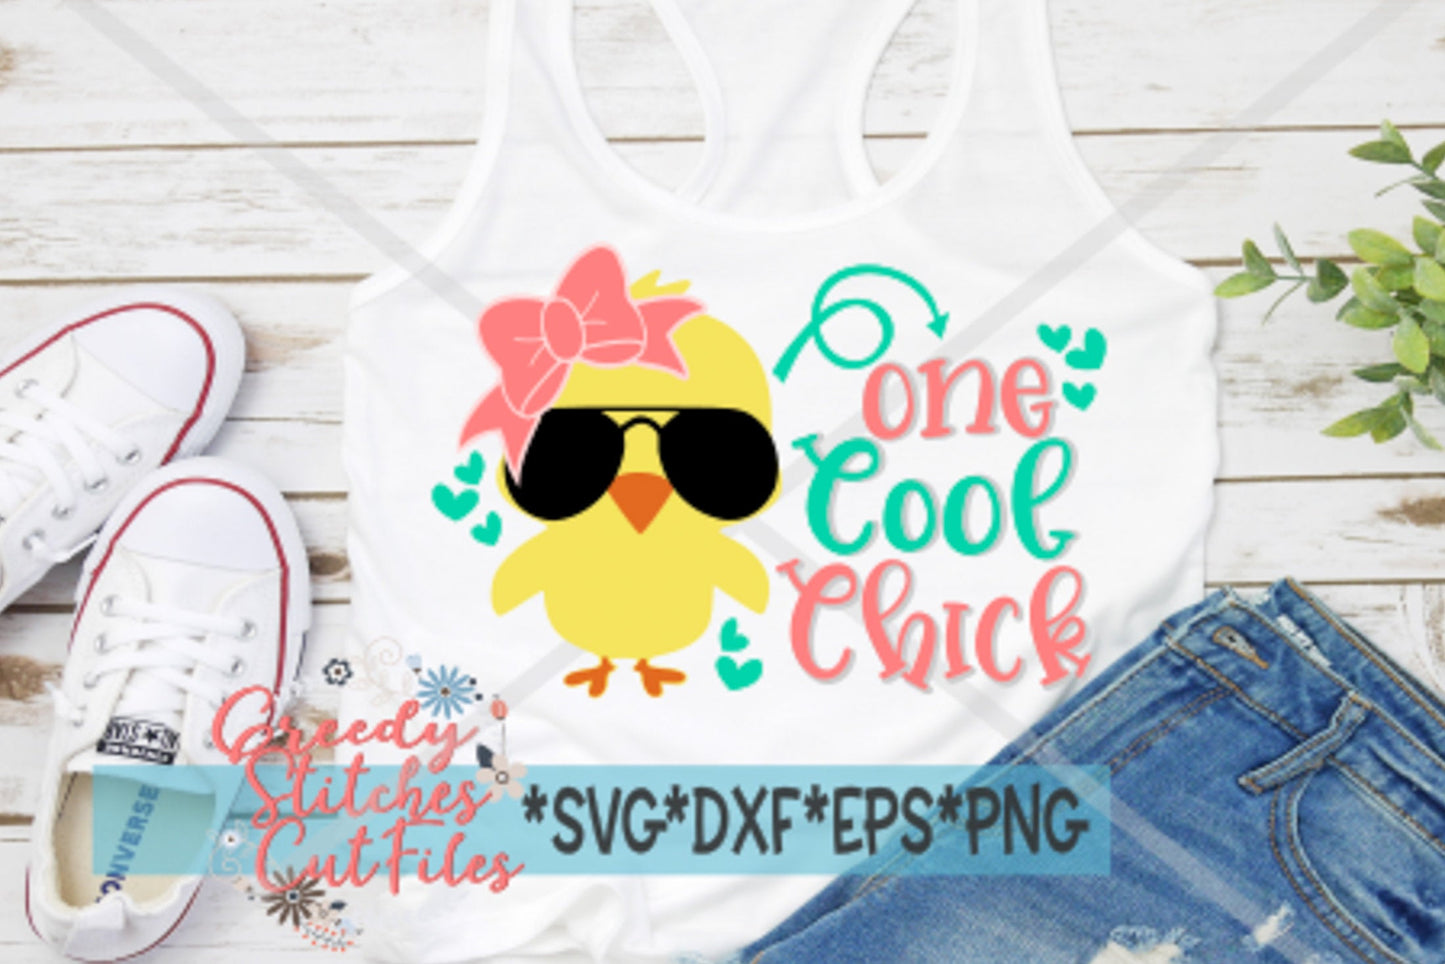 Easter SvG | One Cool Chick svg, dxf, eps, png. Easter SvG | Chick SvG | Cool Chick SvG | Easter Girl SvG | Instant Download Cut File